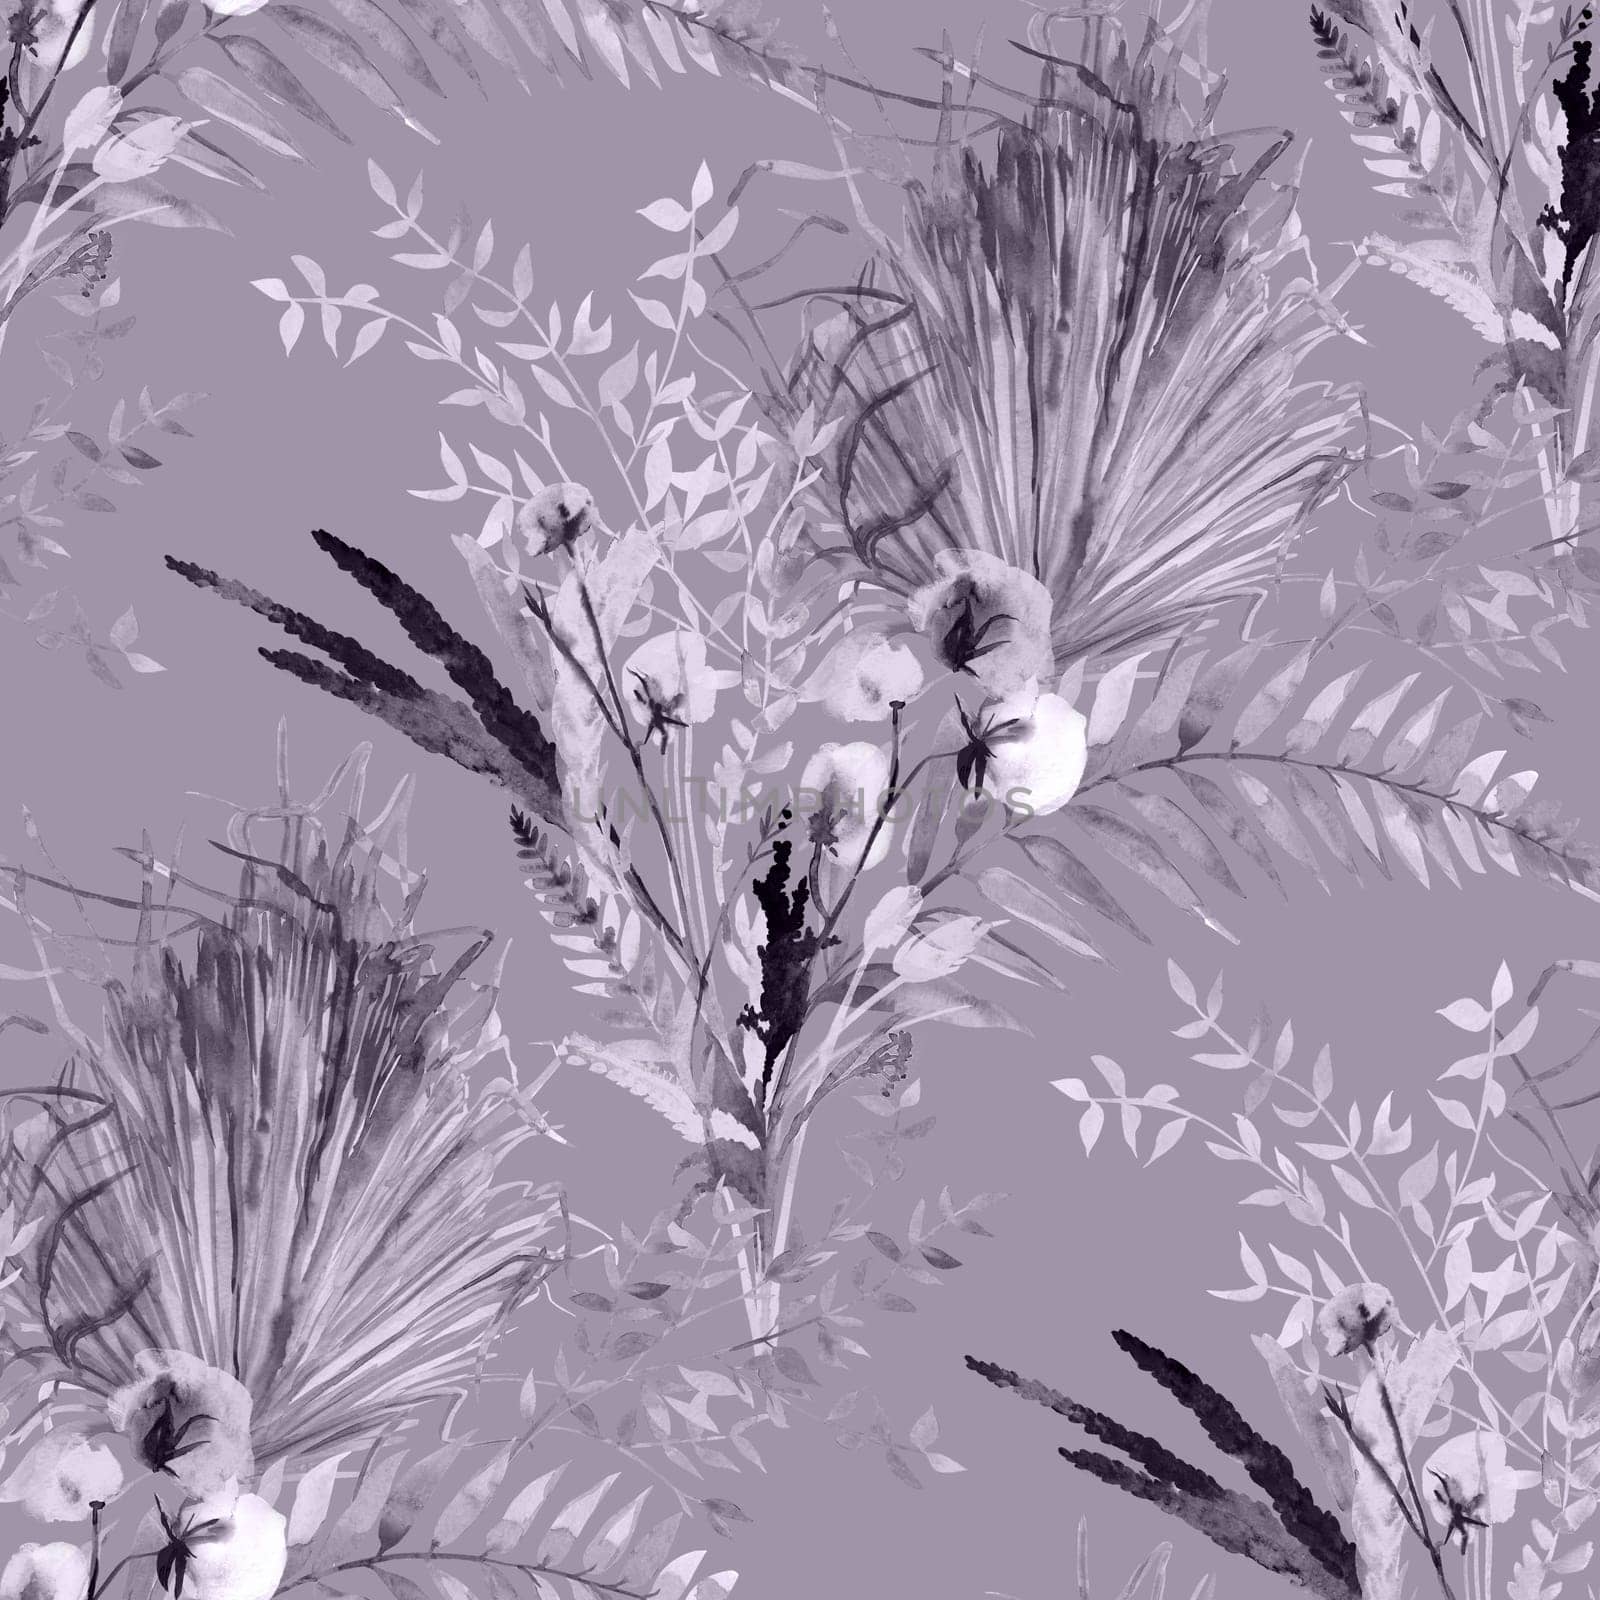 Monochrome seamless pattern with silhouettes of dry branches and leaves of palm trees and ferns for summer textiles